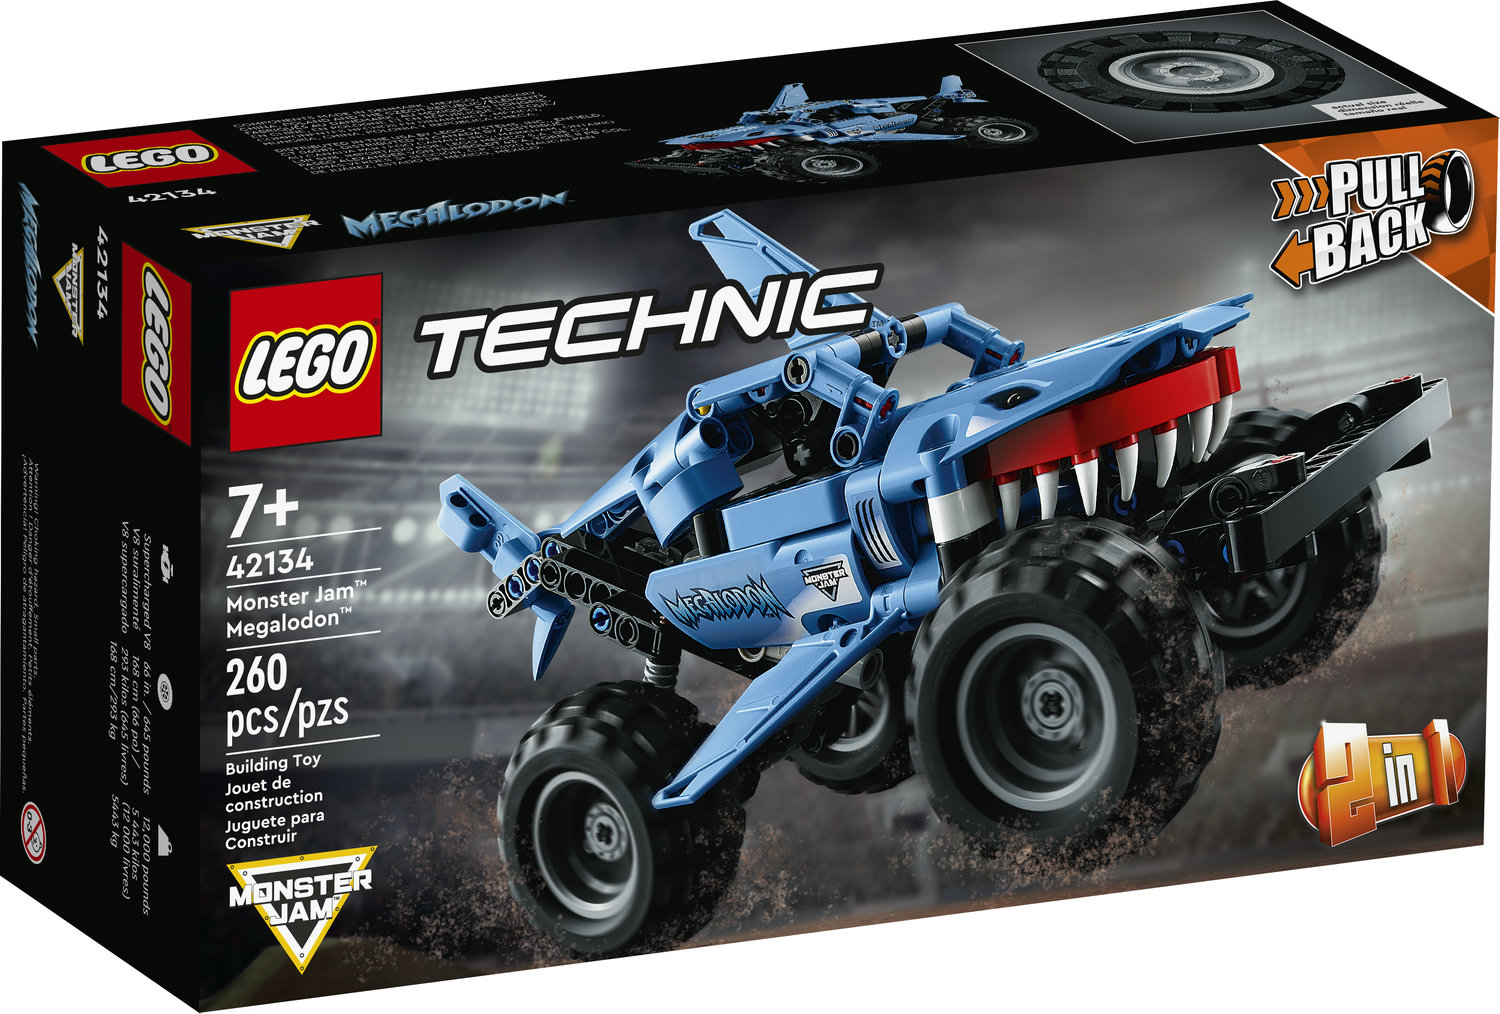 LEGO Technic Monster Jam Megalodon 42134 2 in 1 Pull Back Shark Truck to Lusca Low Racer Car Toy, 2022 Series, Set for Kids, Boys and Girls 7 Plus Years Old - image 4 of 10